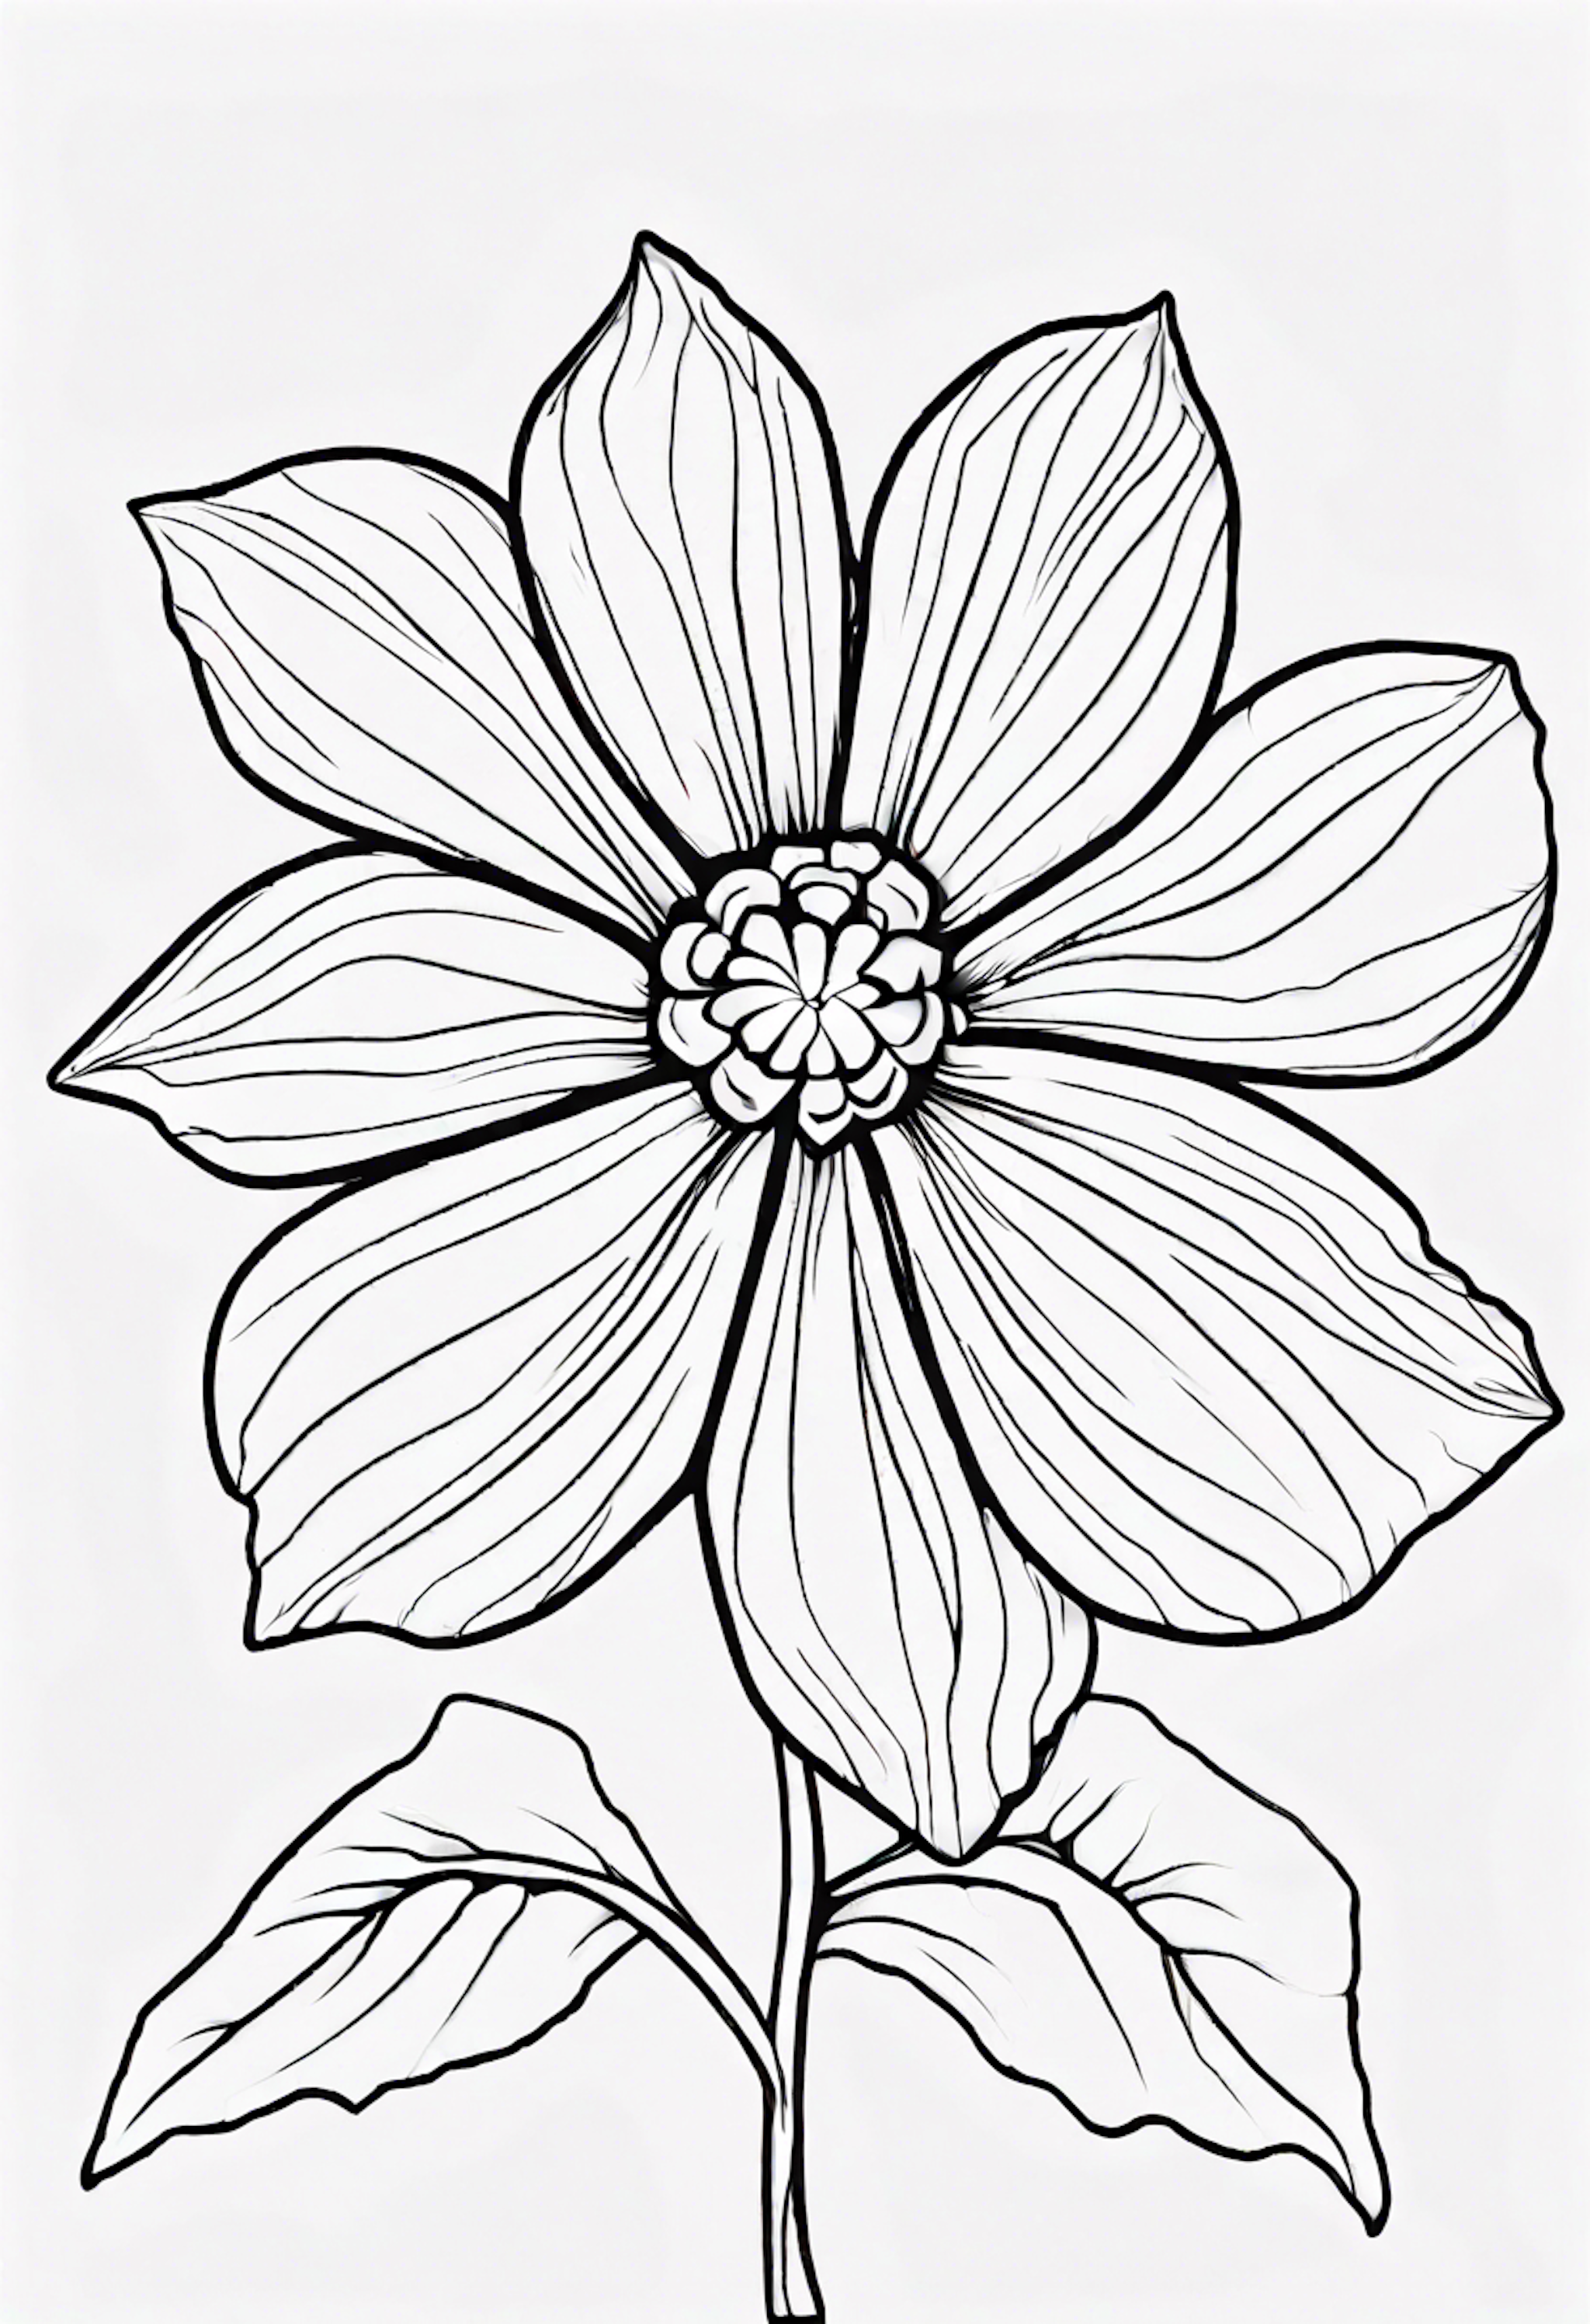 A coloring page for 1 Flower coloring pages